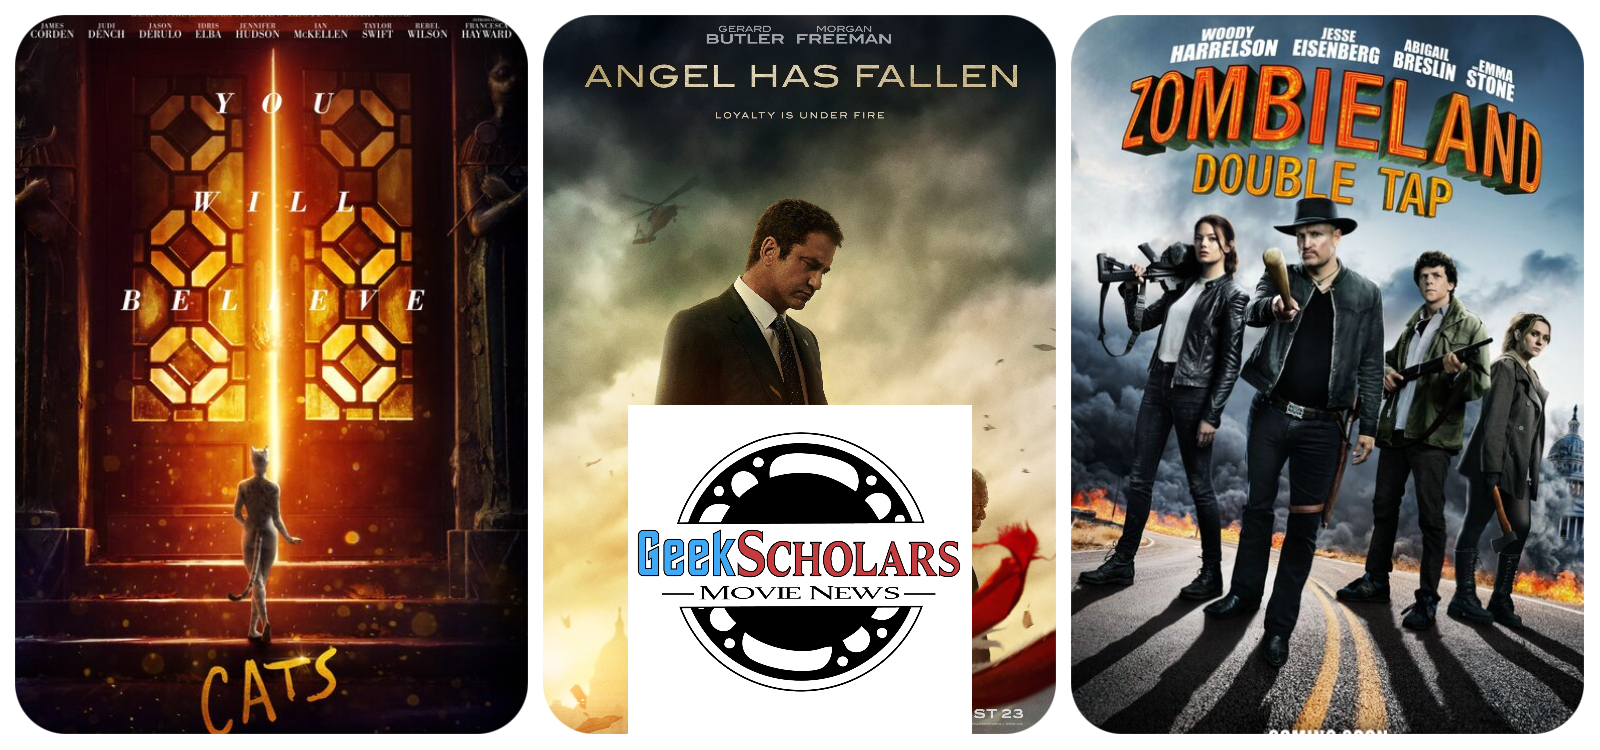 Cats a Catastrophe? Angel Has Fallen Will Rise? Zombieland: Double Tap Taps into Magic Again?